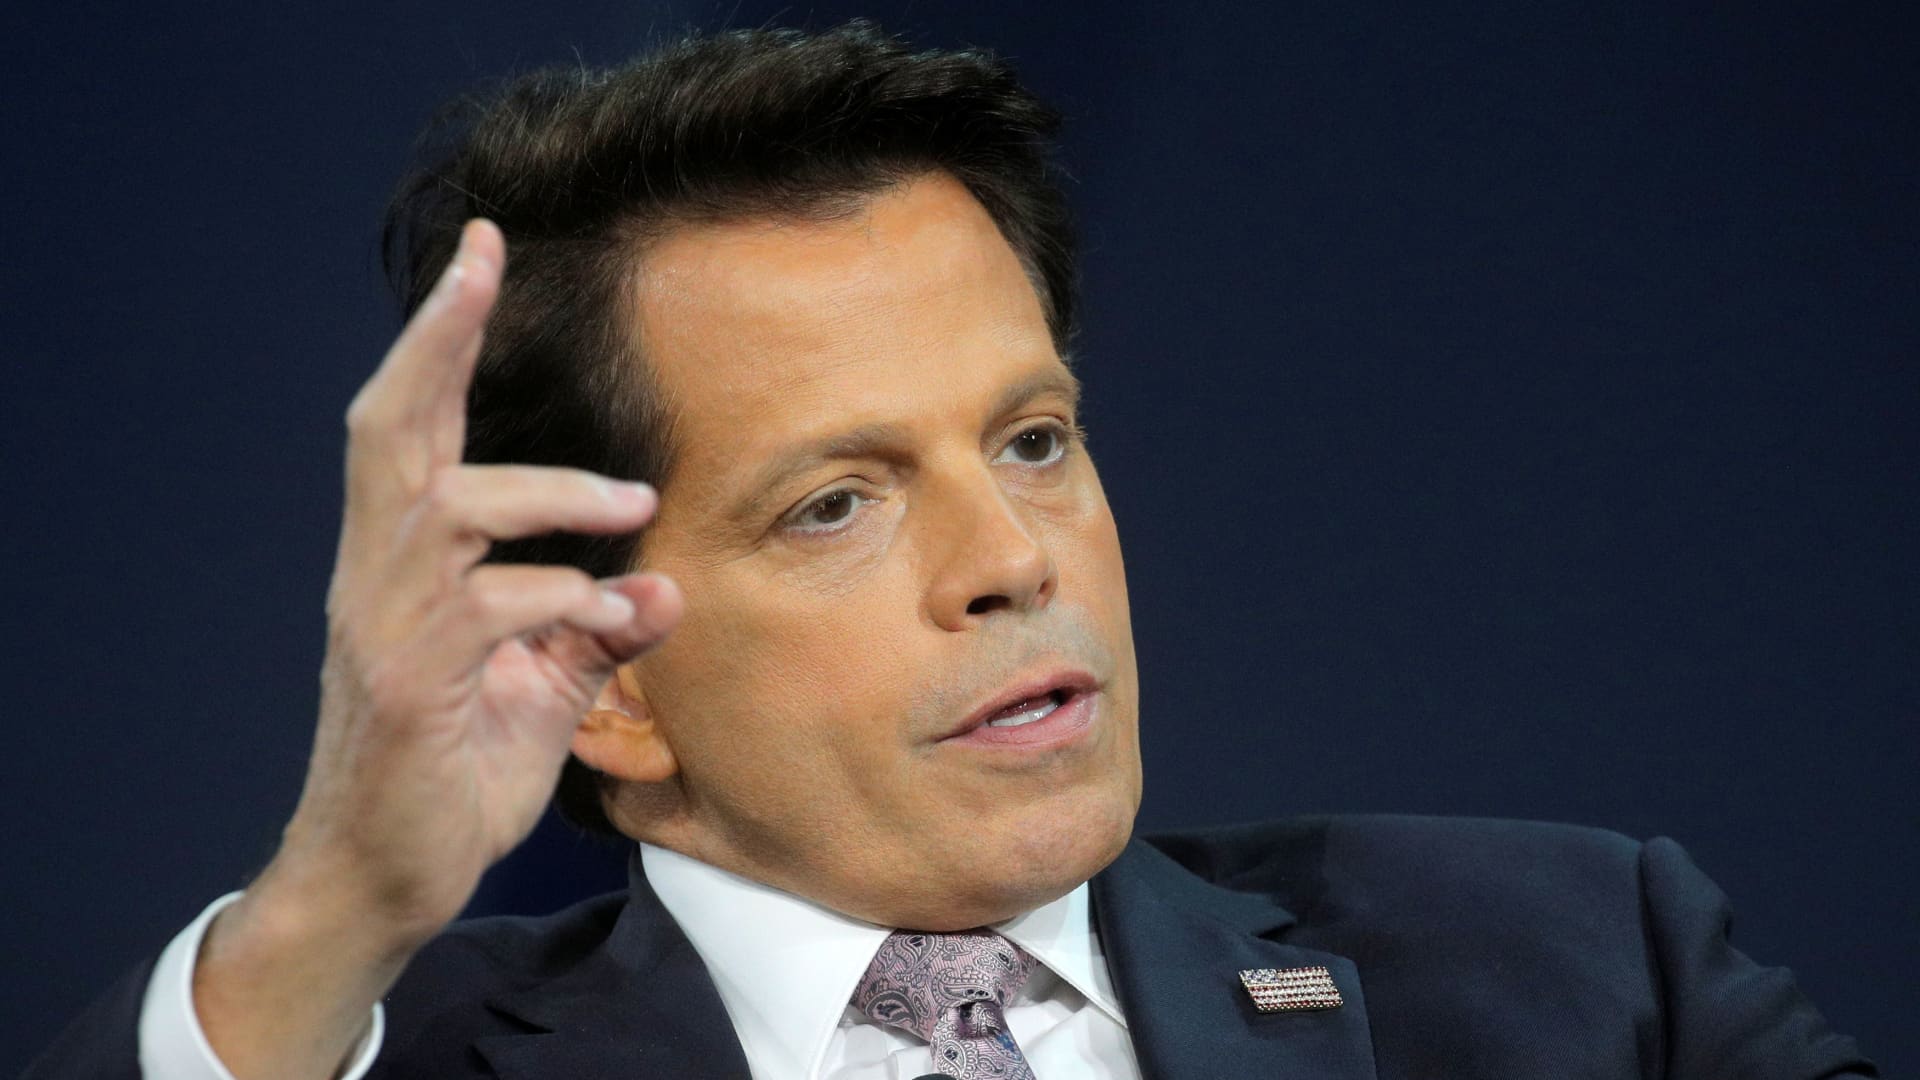 Scaramucci talks FTX, Sam Bankman-Fried and ‘the worst week in